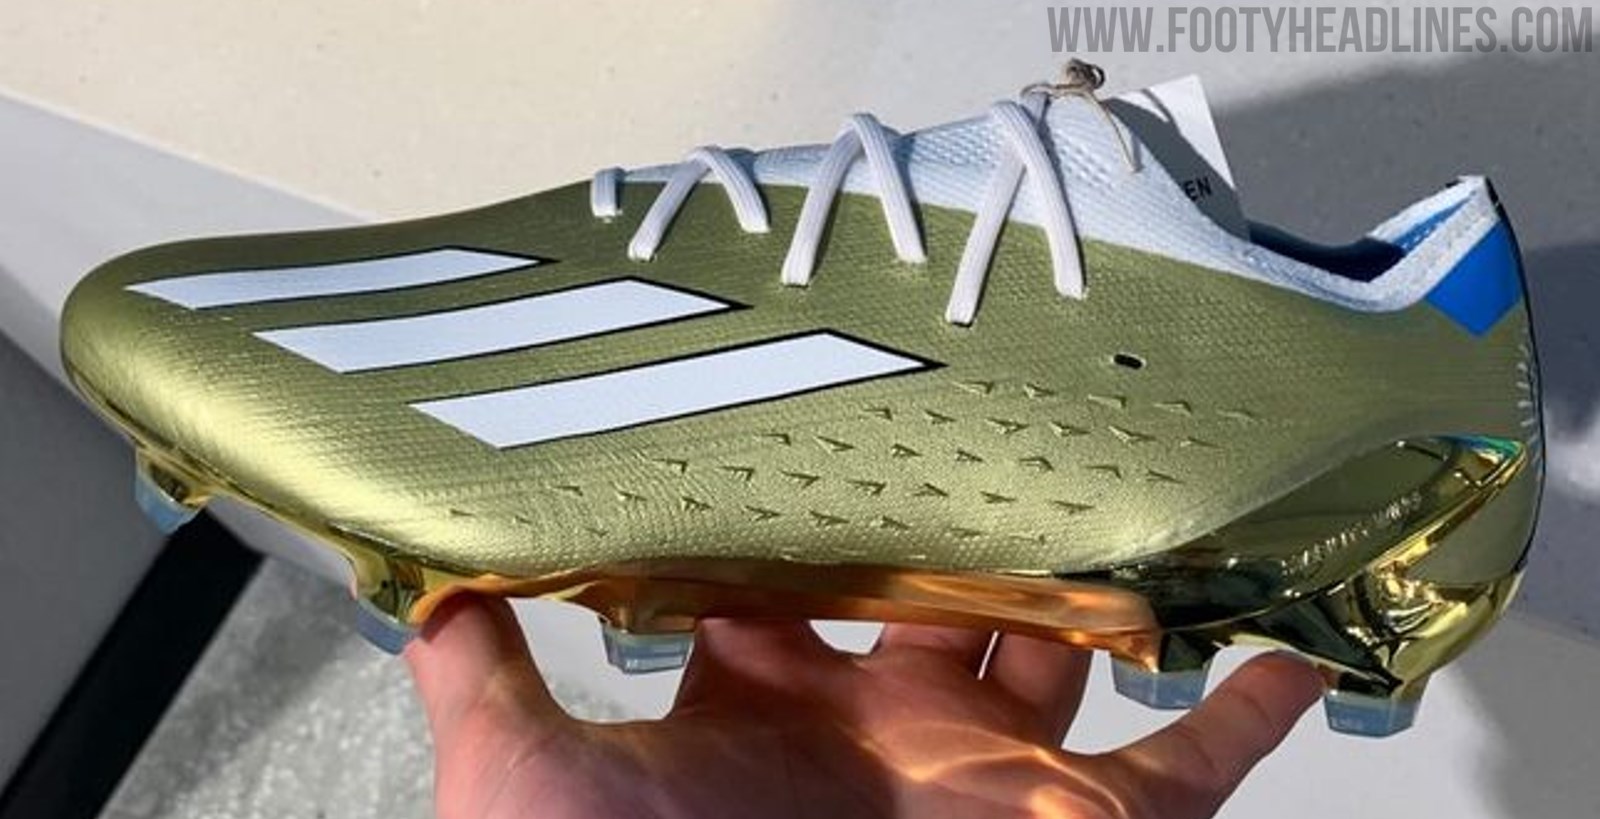 Lionel Messi's World Cup Boots: Messi's boots Adidas for FIFA World Cup revealed